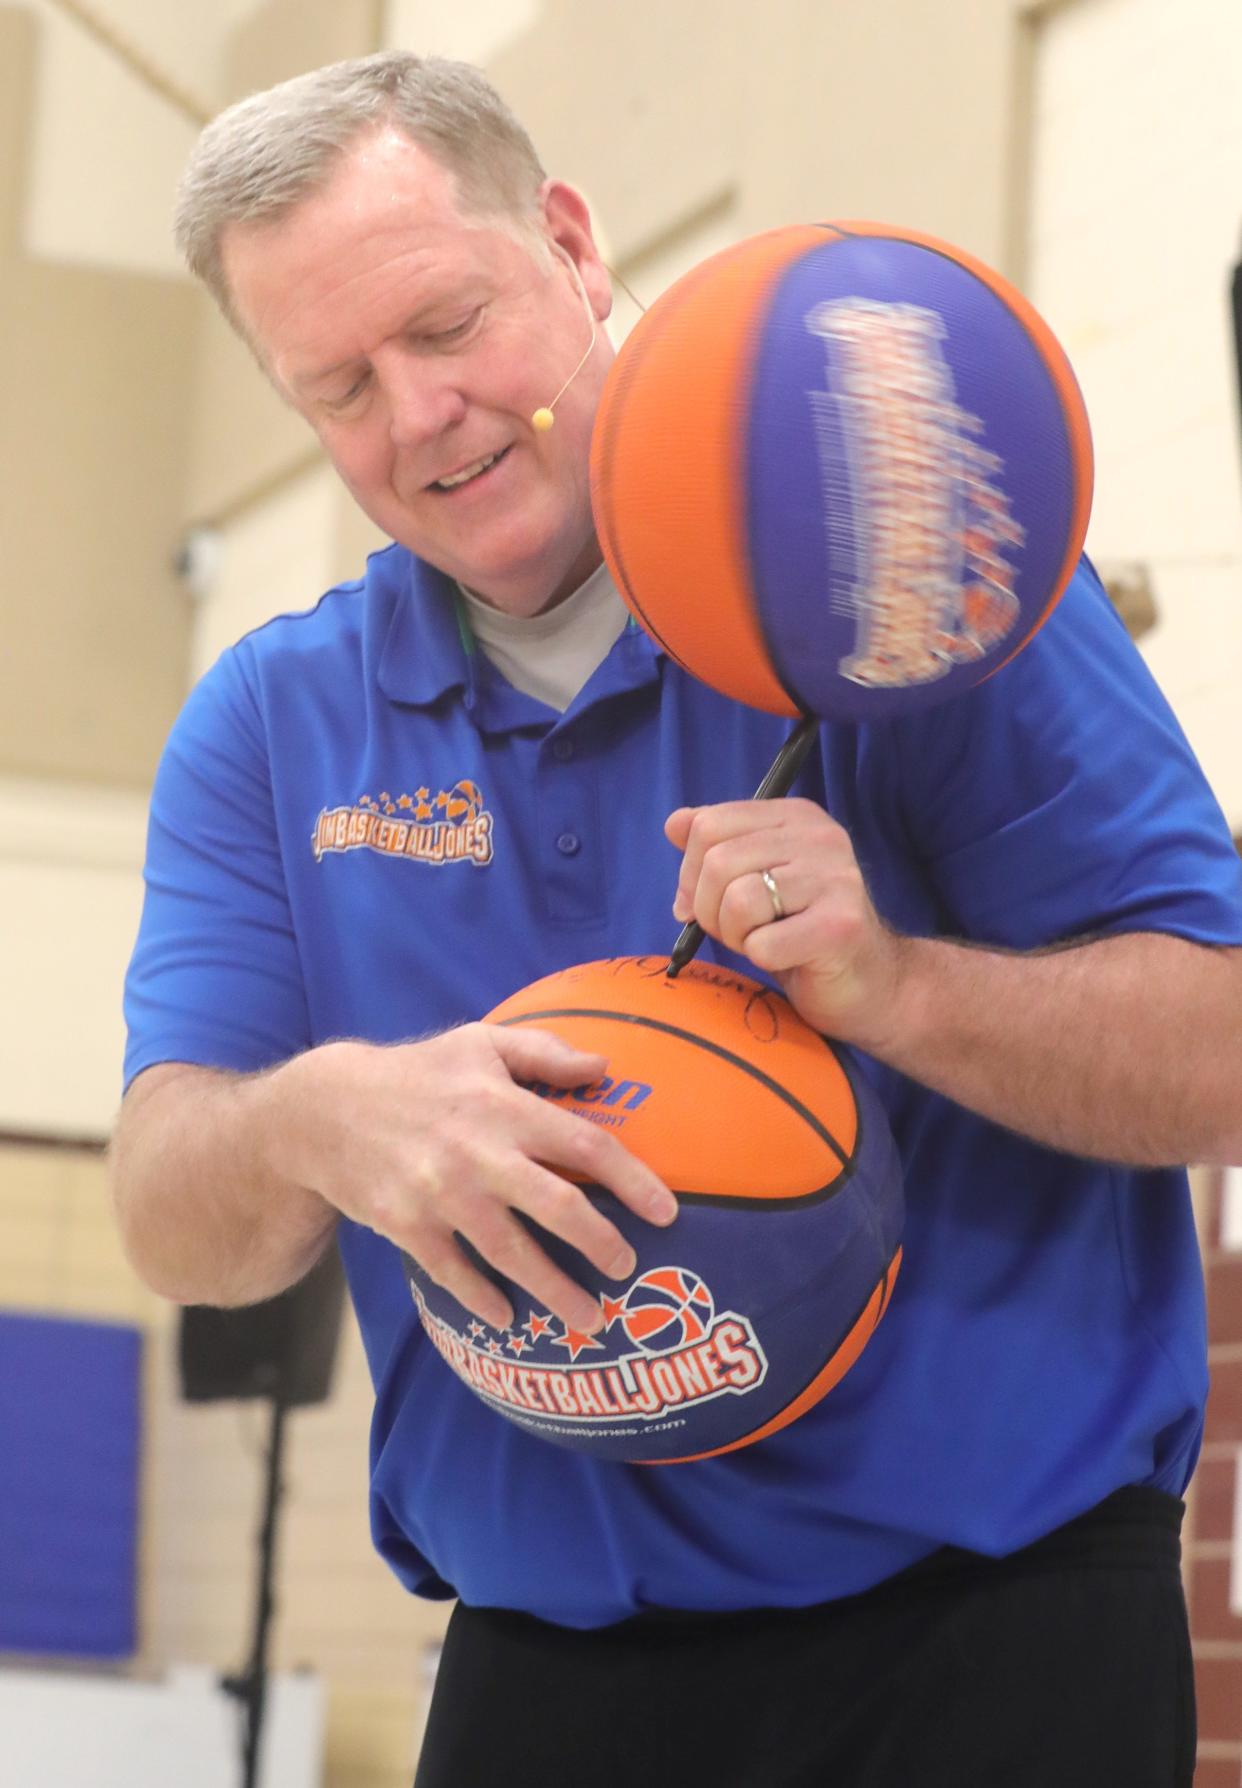 Jim Basketball Jones signs a basketball while balancing a spinning ball on his pen during an assembly for students at Herberich Primary School on Tuesday in Fairlawn.